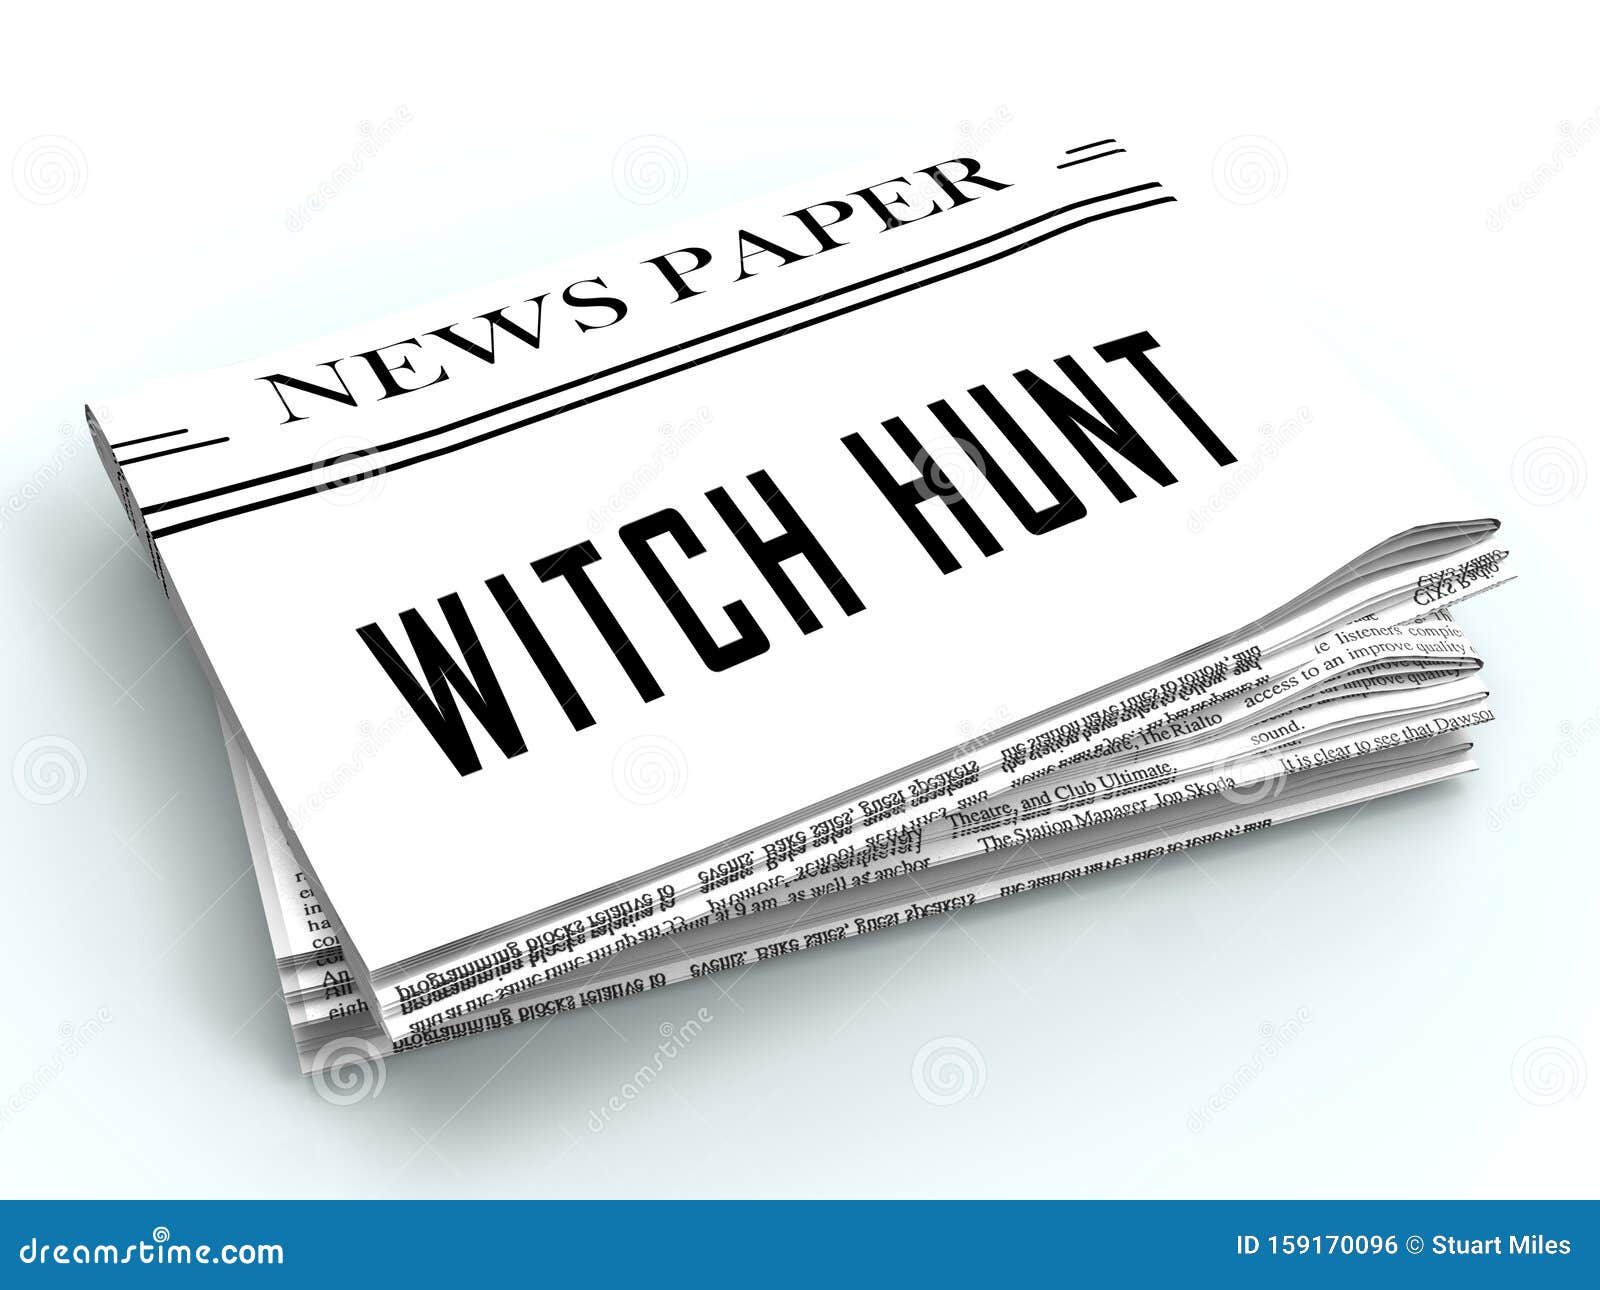 witch hunt newspaper meaning harassment or bullying to threaten or persecute 3d 